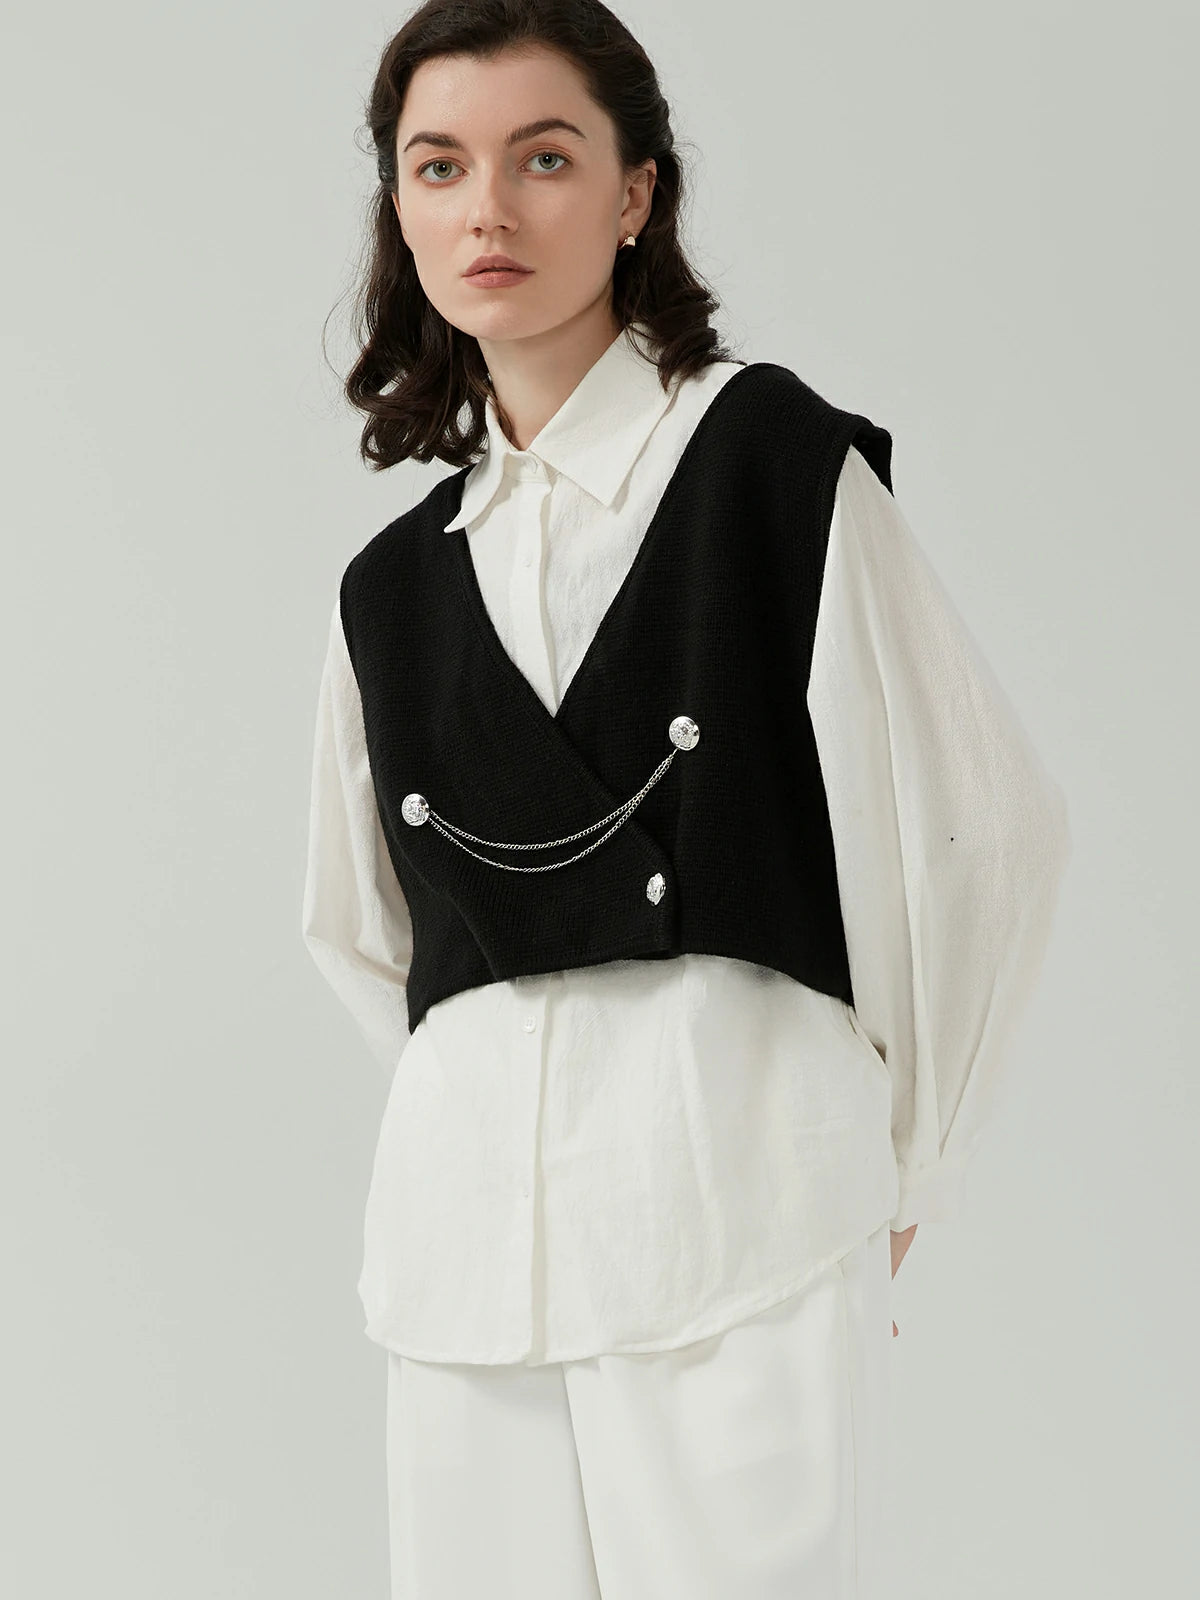 Retro chain vest and bubble sleeve shirt&#39;s fashion: Combining style and comfort.